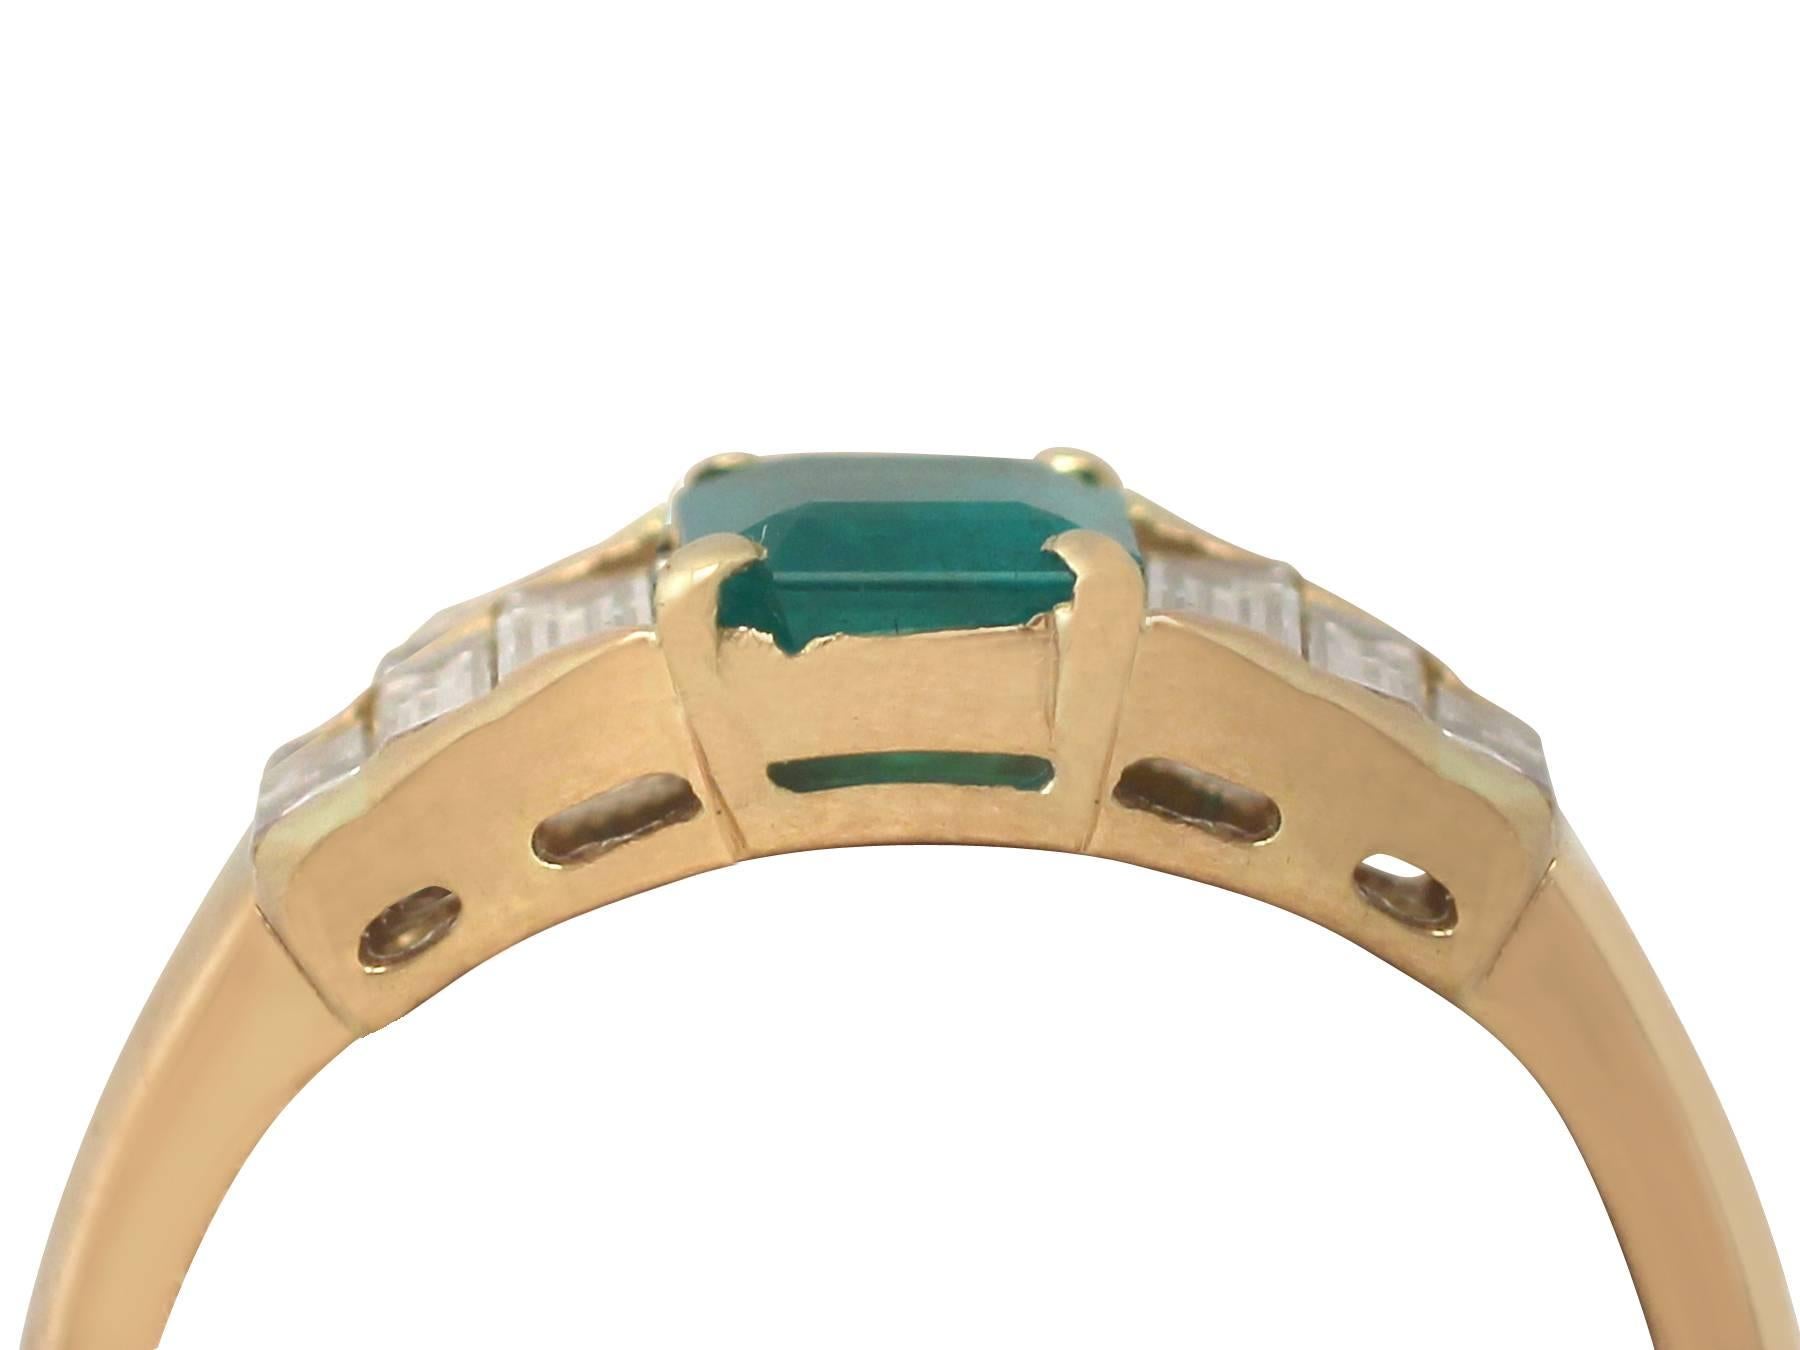 A fine and impressive 0.88 carat emerald and 0.84 carat diamond, 18 karat yellow gold dress ring; part of our diverse contemporary jewellery collections

This fine and impressive emerald and diamond ring has been crafted 18 k yellow gold.

The